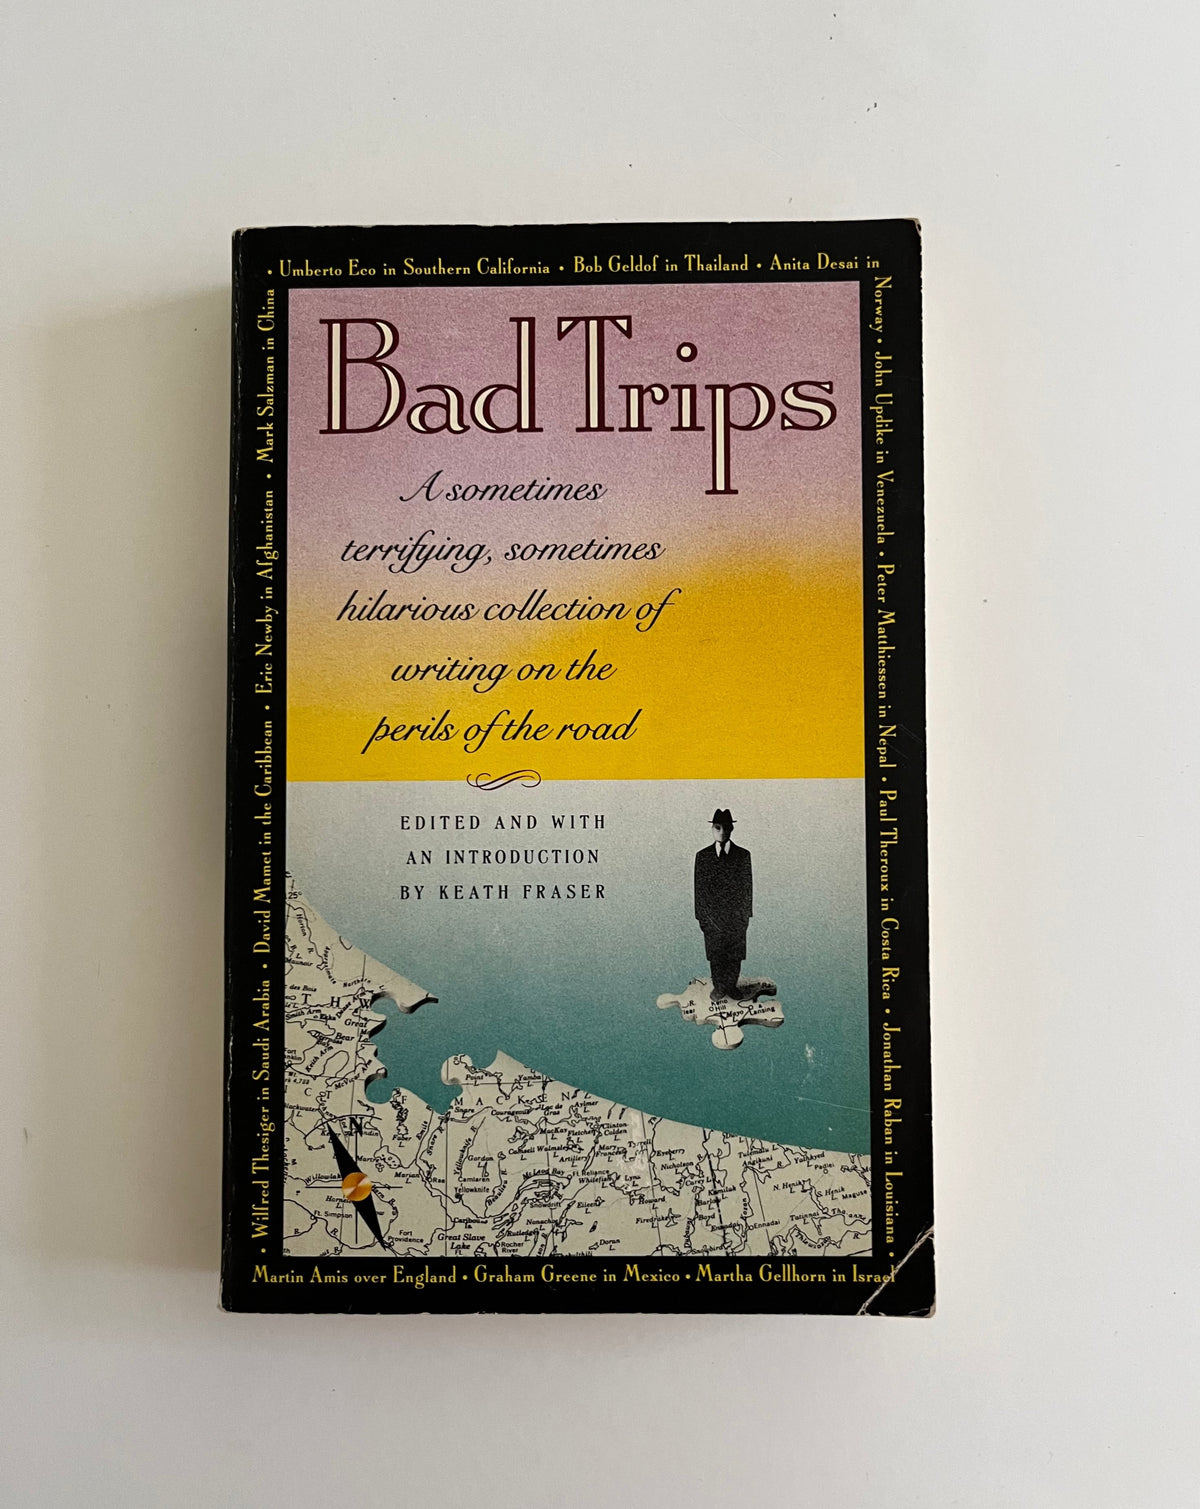 Bad Trips: A Sometimes Terrifying, Sometimes Hilarious Collection of Writing on the Perils of the Road edited by Keath Fraser